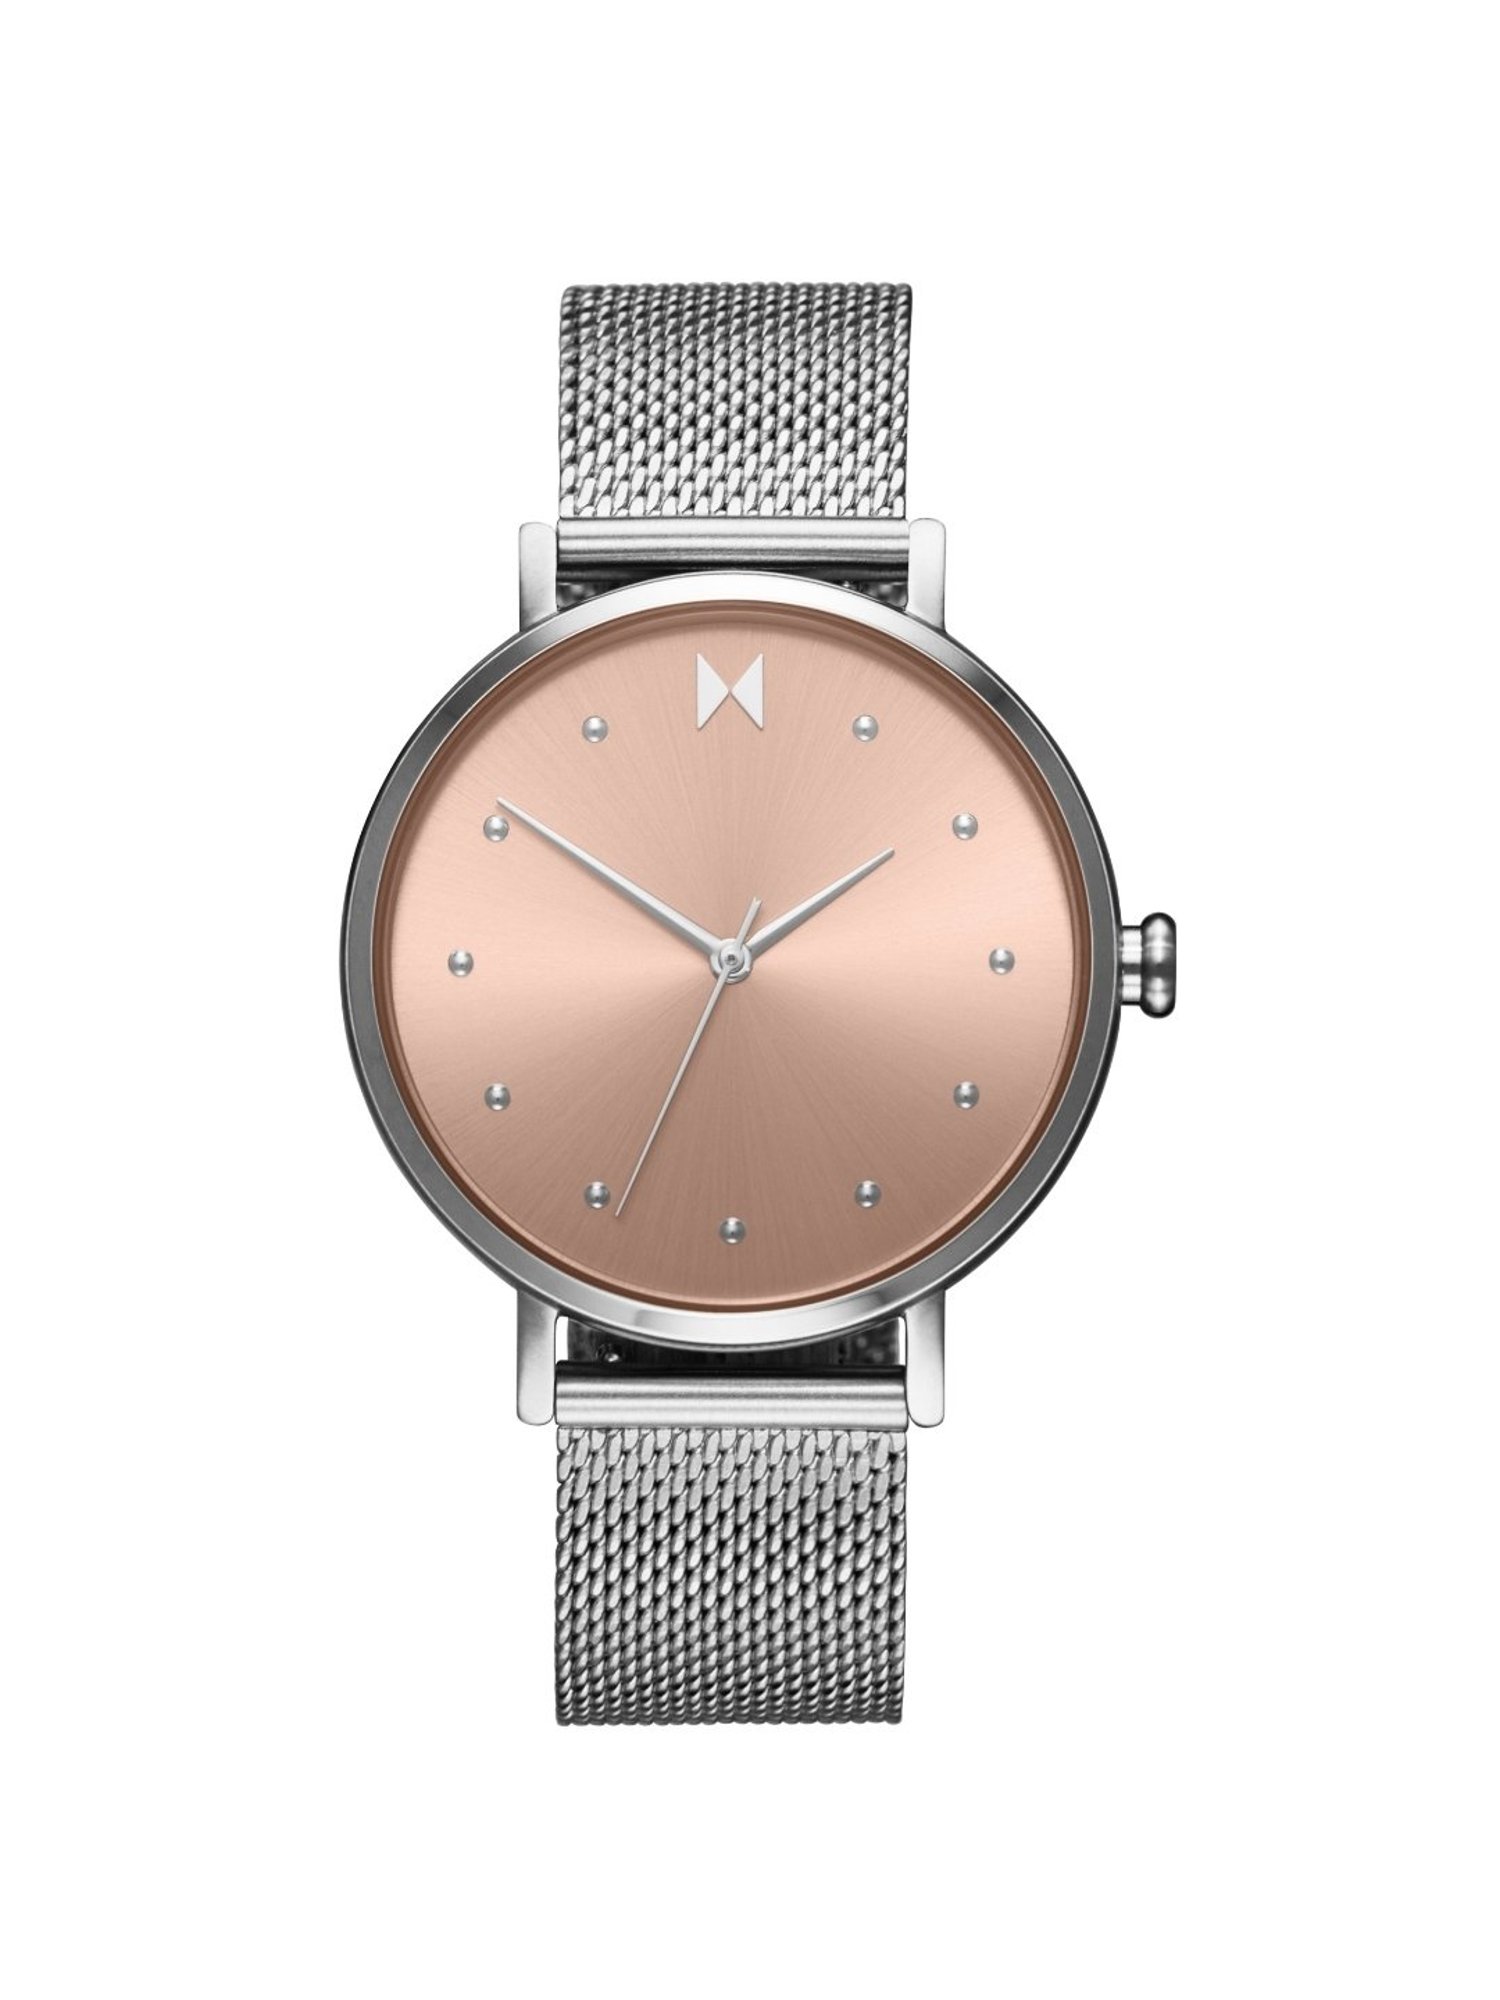 The Dot Braille Smartwatch - What Makes It Tick? -